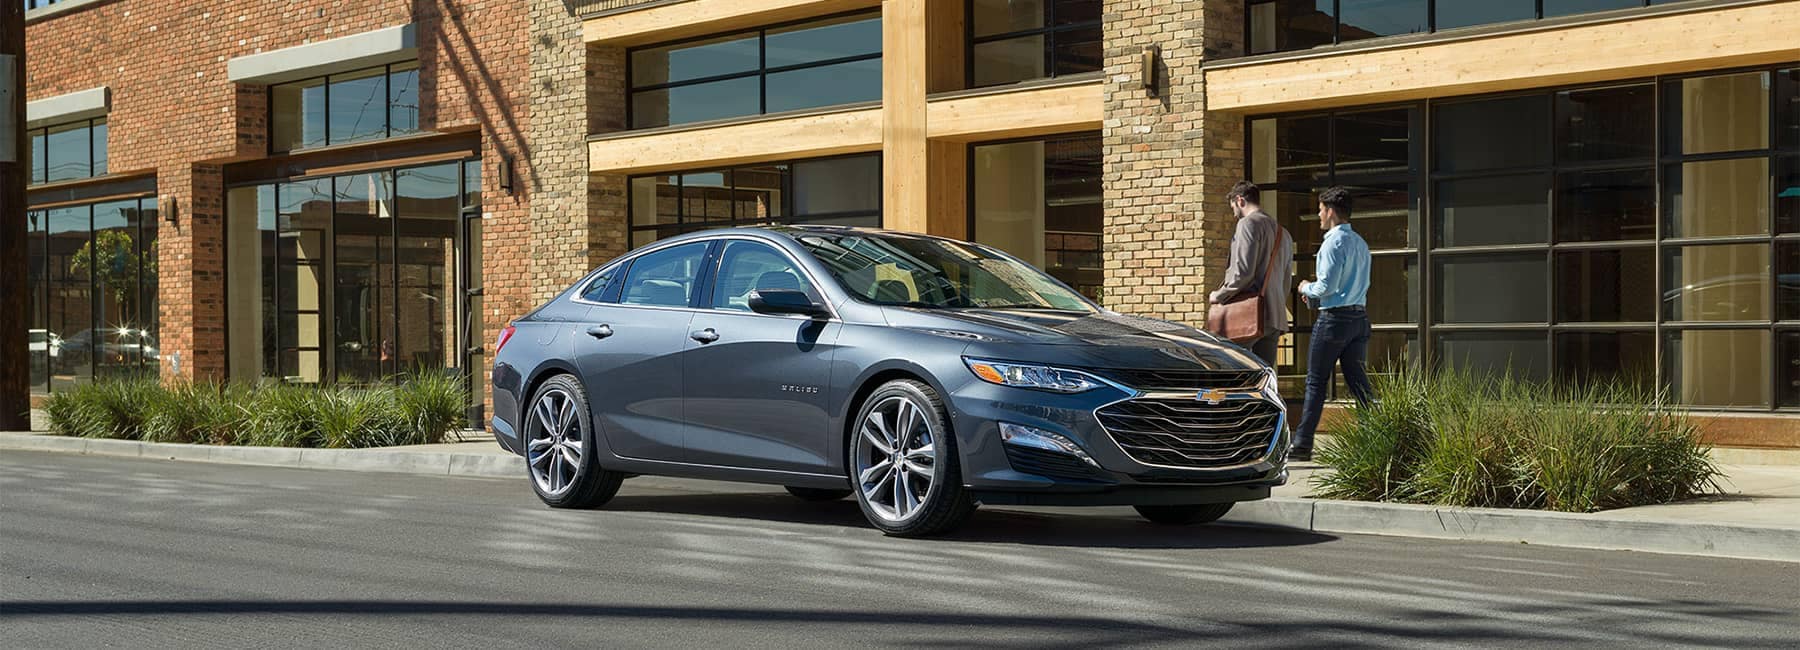 2020 Chevy Malibu Midsize Car Front Side View